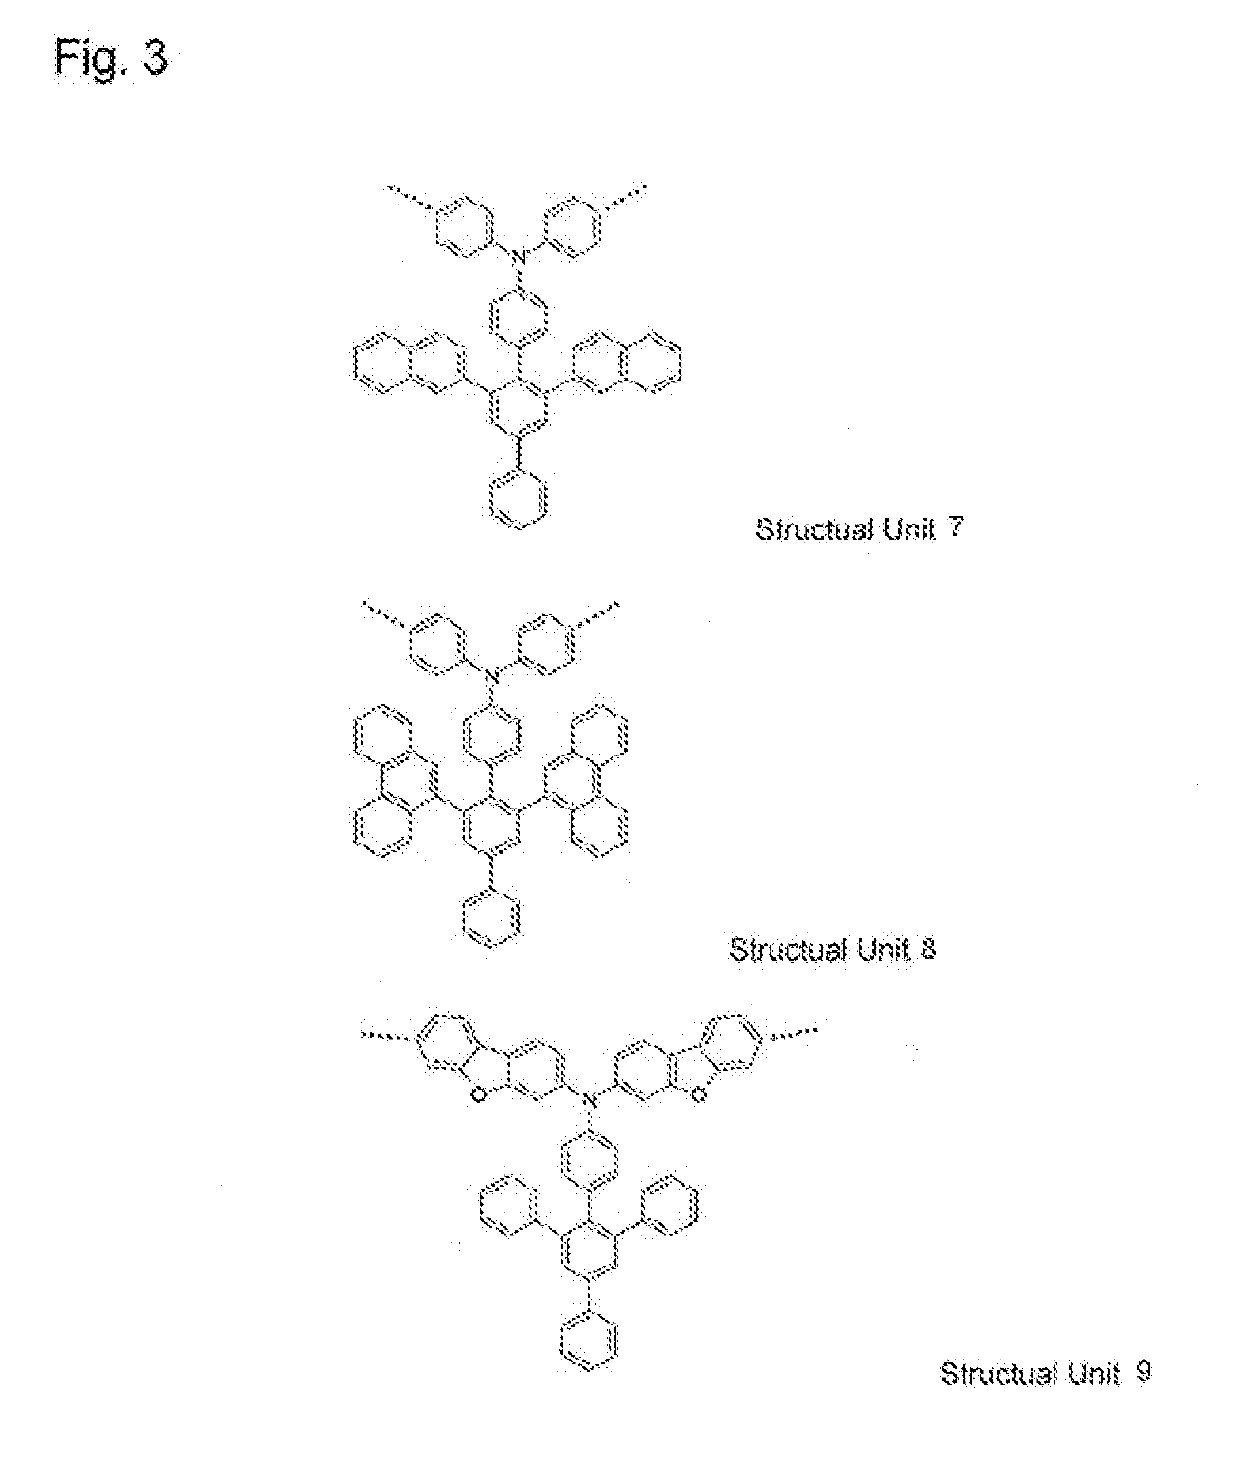 High molecular weight compound containing substituted triarylamine structural unit